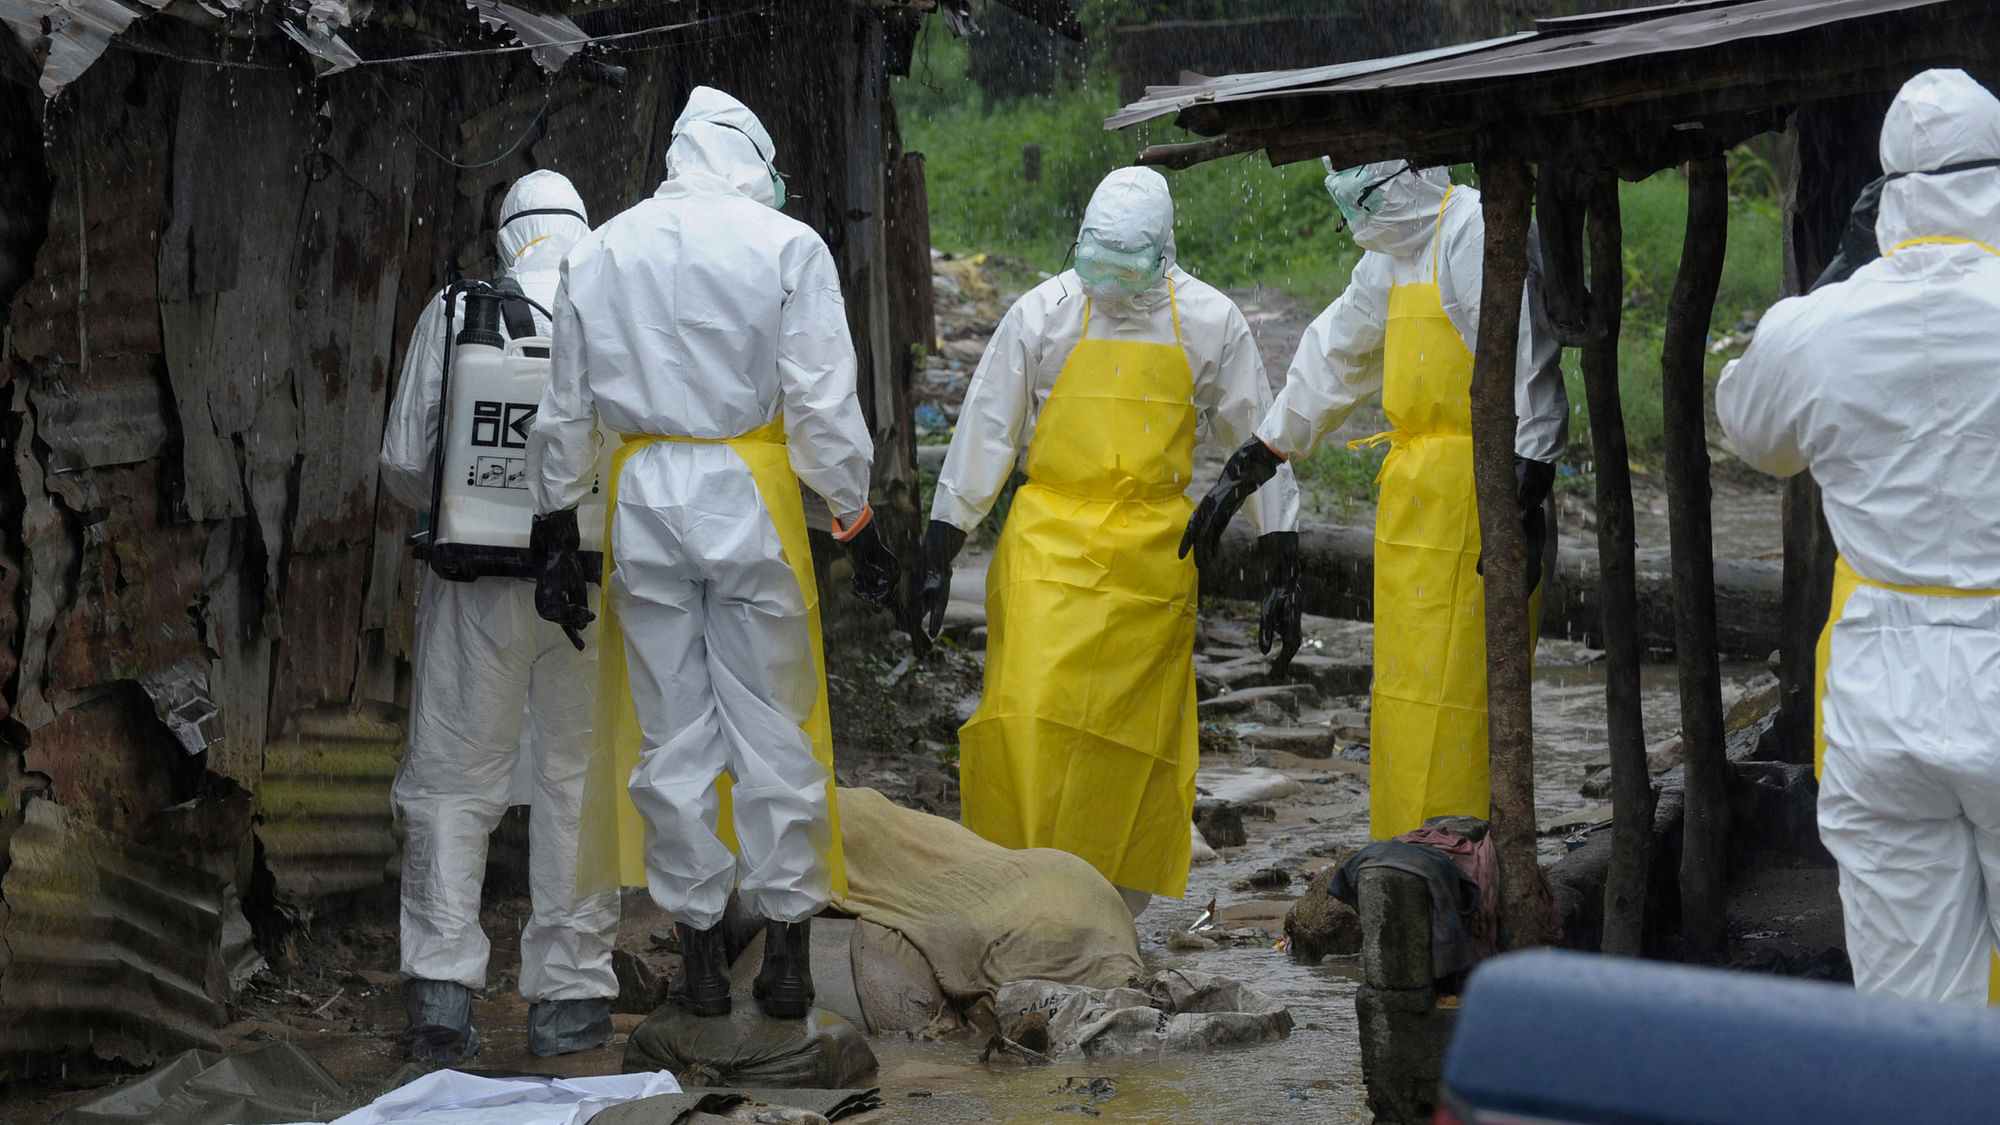 The World Health Organisation named Congo’s Ebola outbreak as the second largest after West Africa’s in 2014.